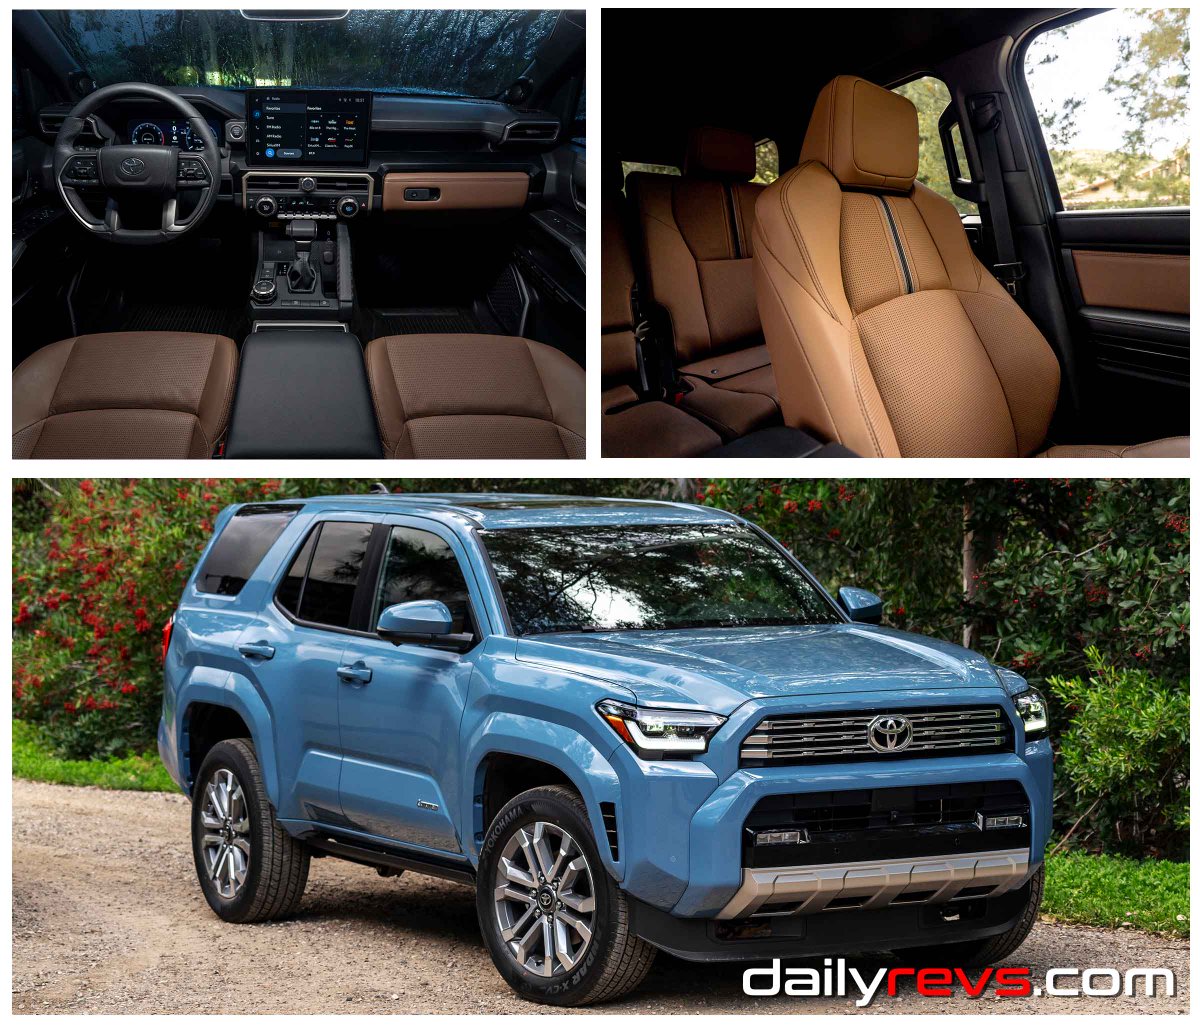 2025 Toyota 4Runner Limited | DailyRevs

4Runner is all-new from the ground up and is built on Toyota’s tough TNGA-F global truck platform that is shared with Tacoma, Land Cruiser, Tundra and Sequoia.

#Toyota #toyota4runner #limited